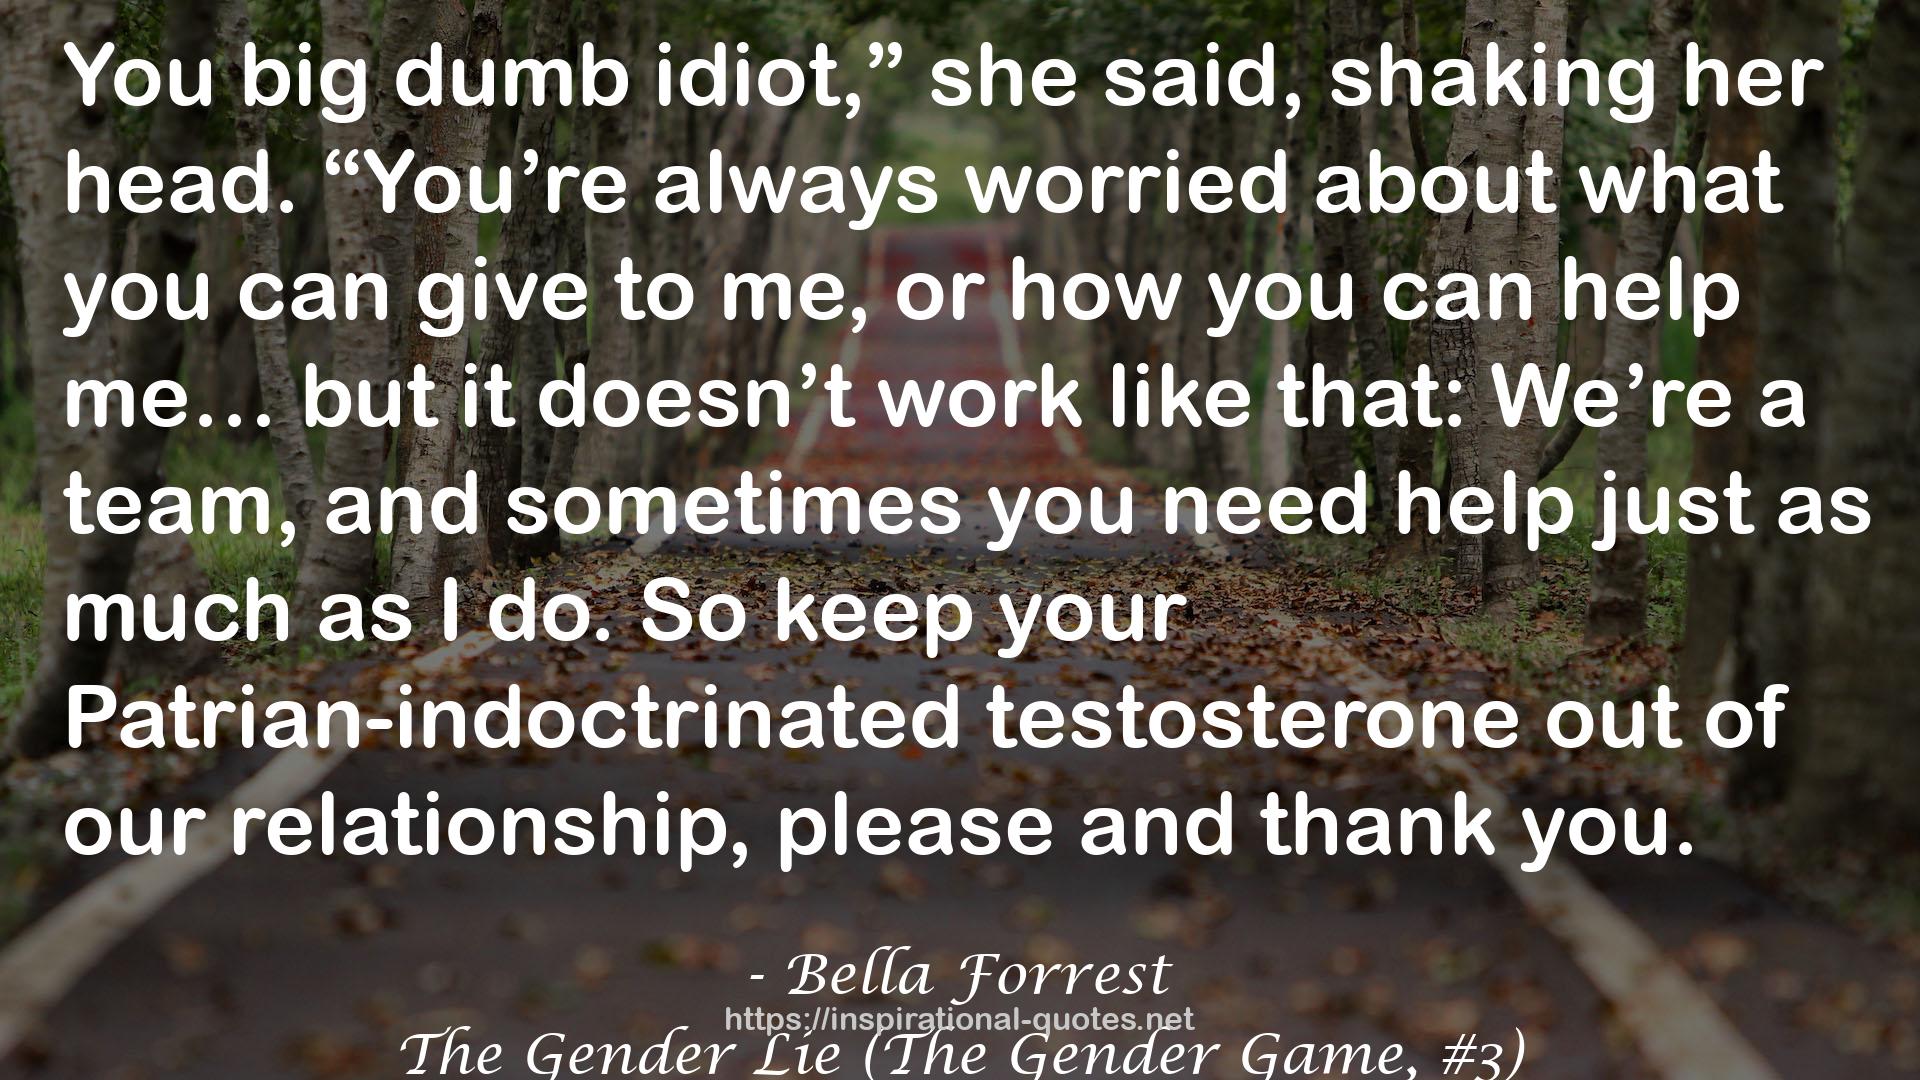 The Gender Lie (The Gender Game, #3) QUOTES